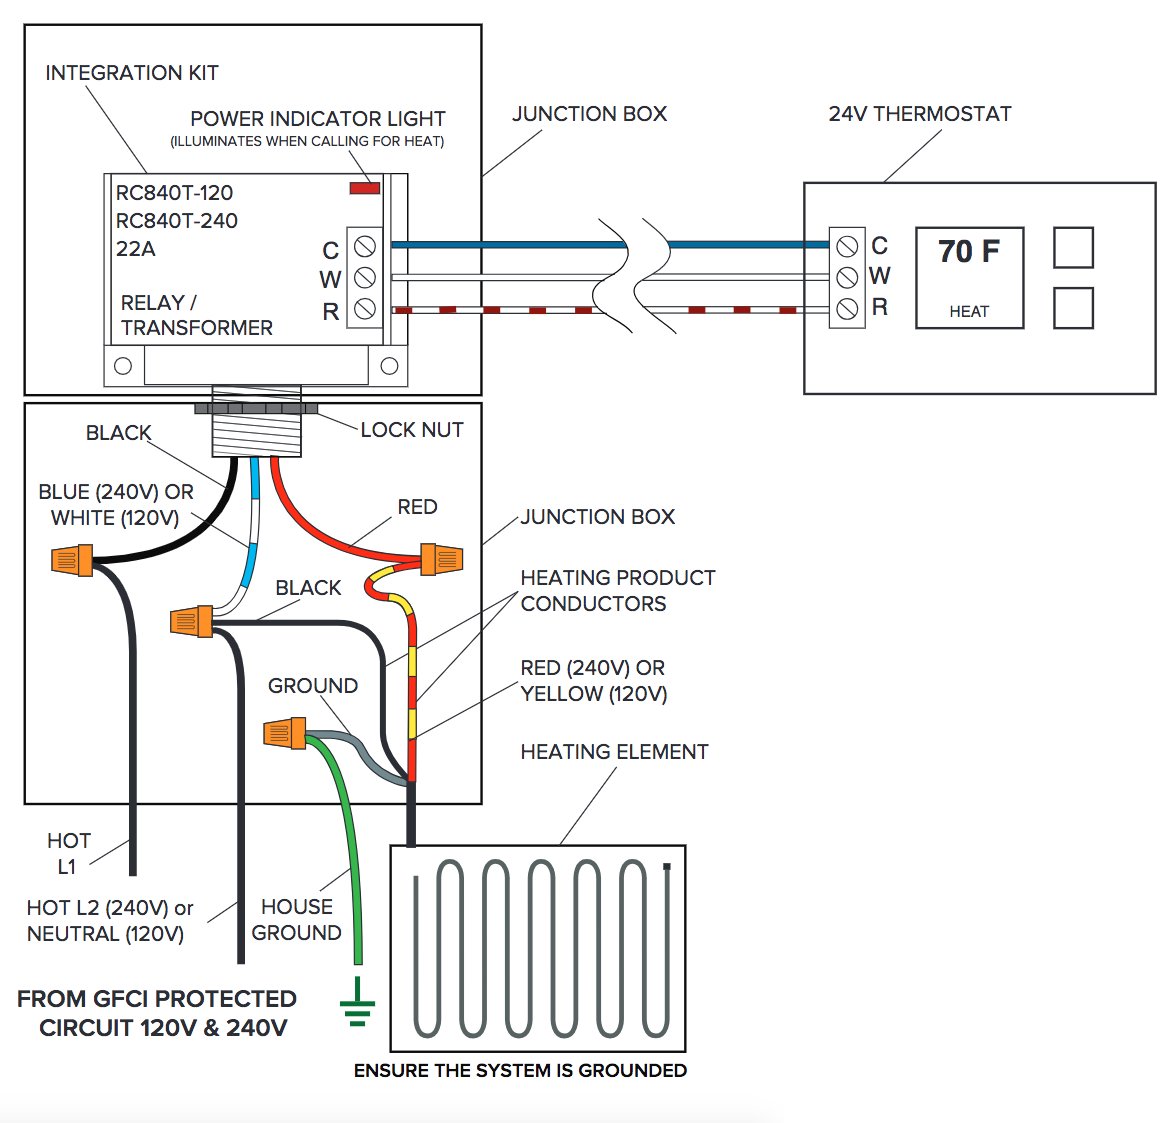 Hot Water Heater Thermostat Wiring Diagram from www.warmlyyours.com